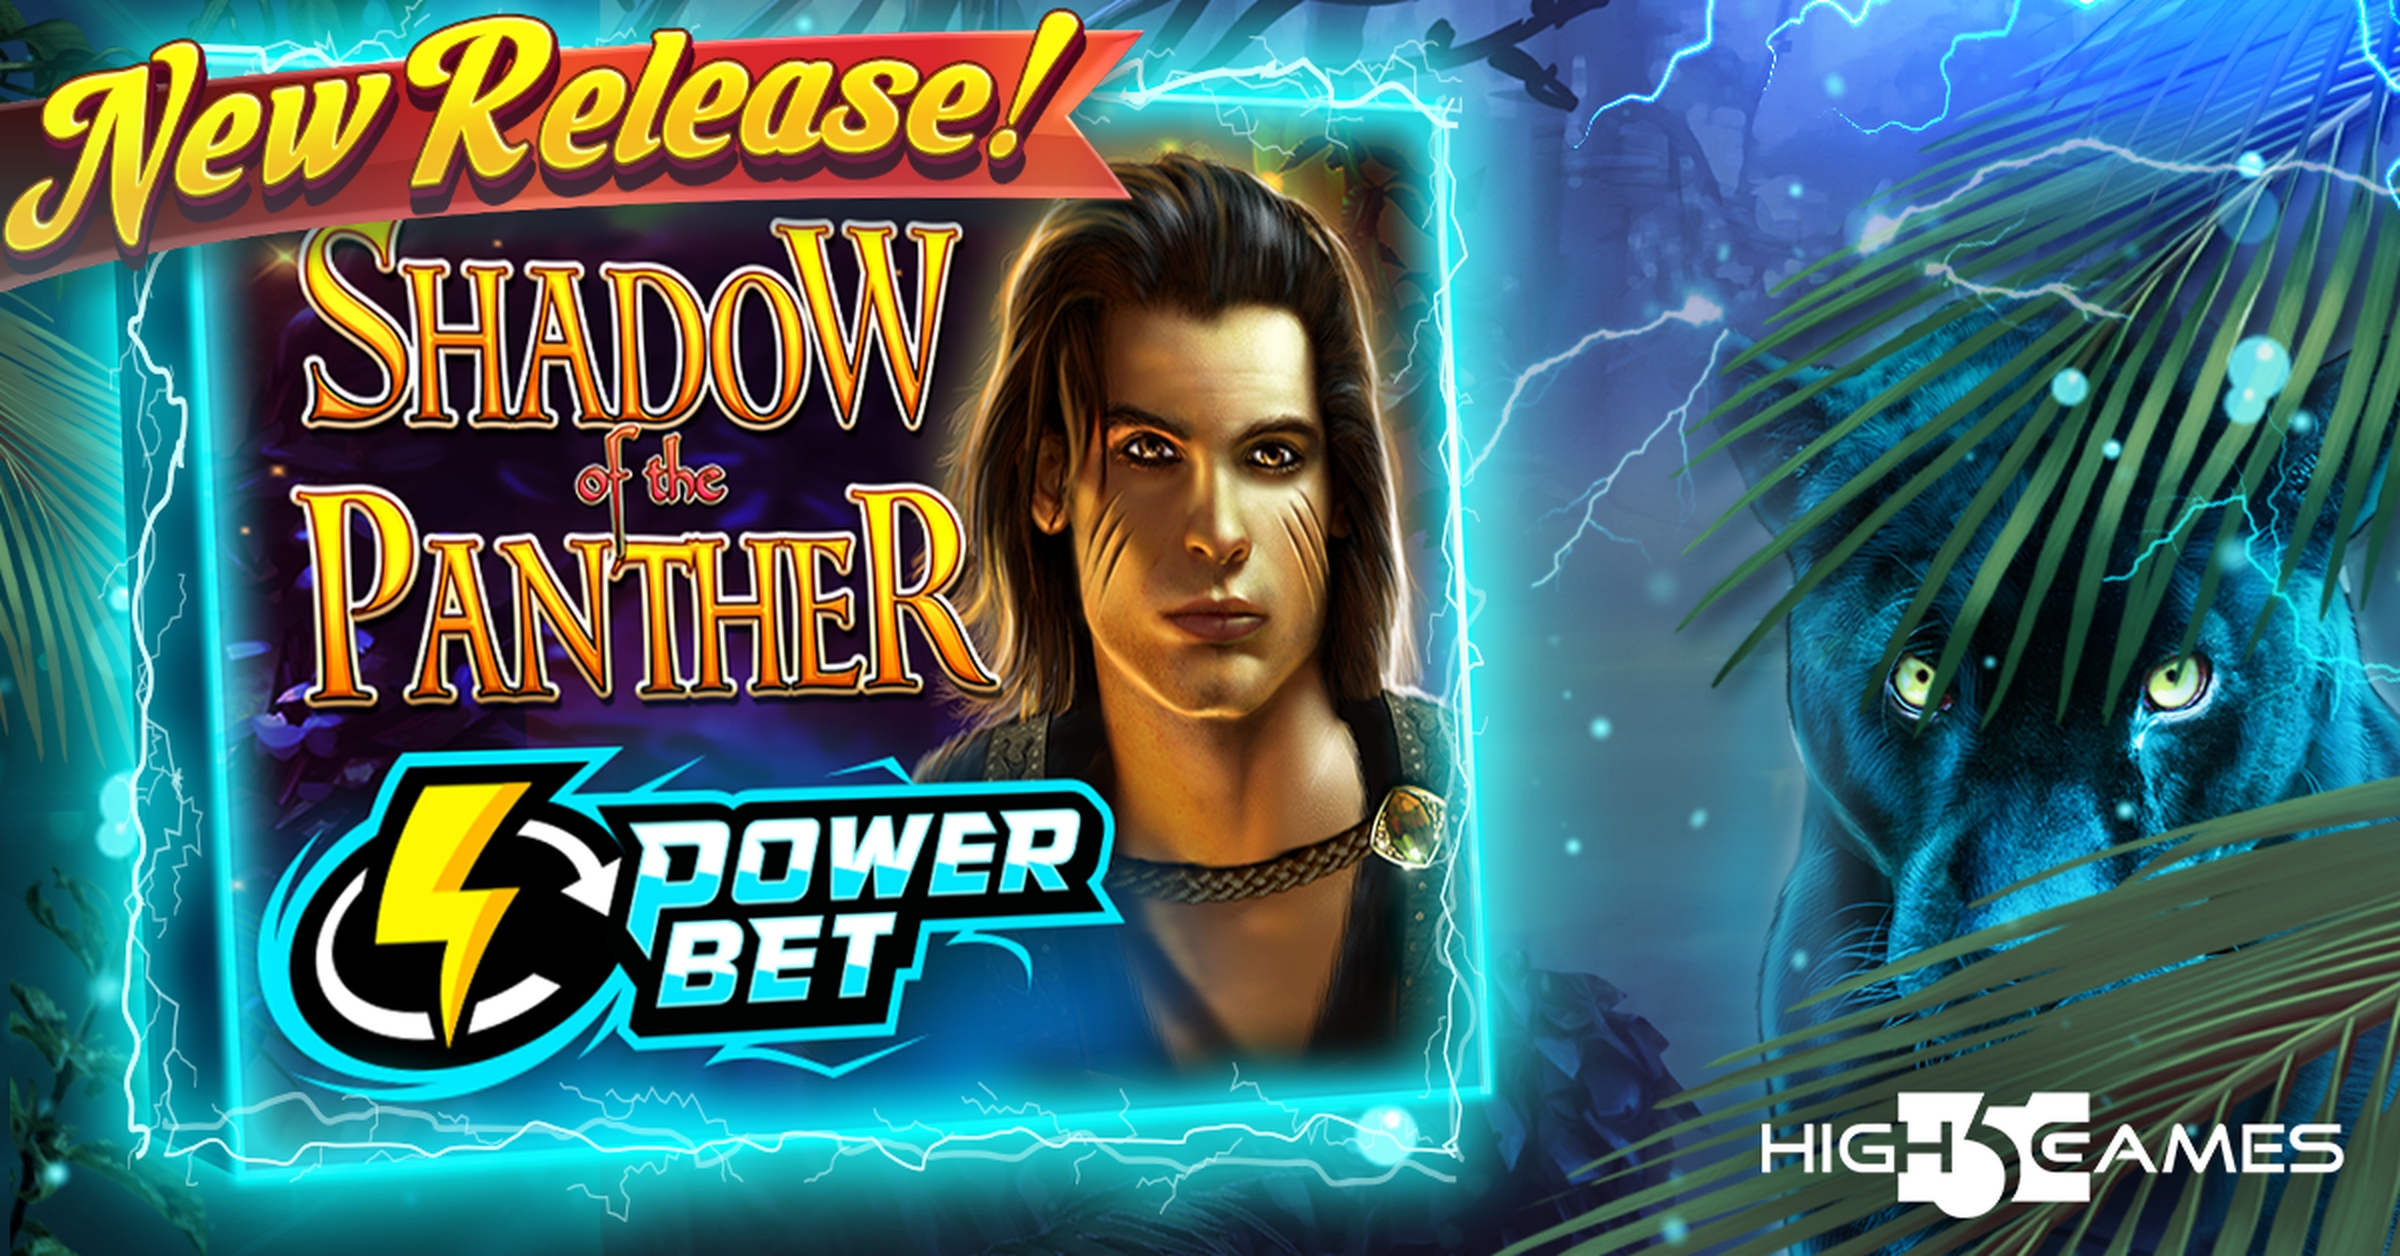 The Shadow of the Panther Online Slot Demo Game by High 5 Games